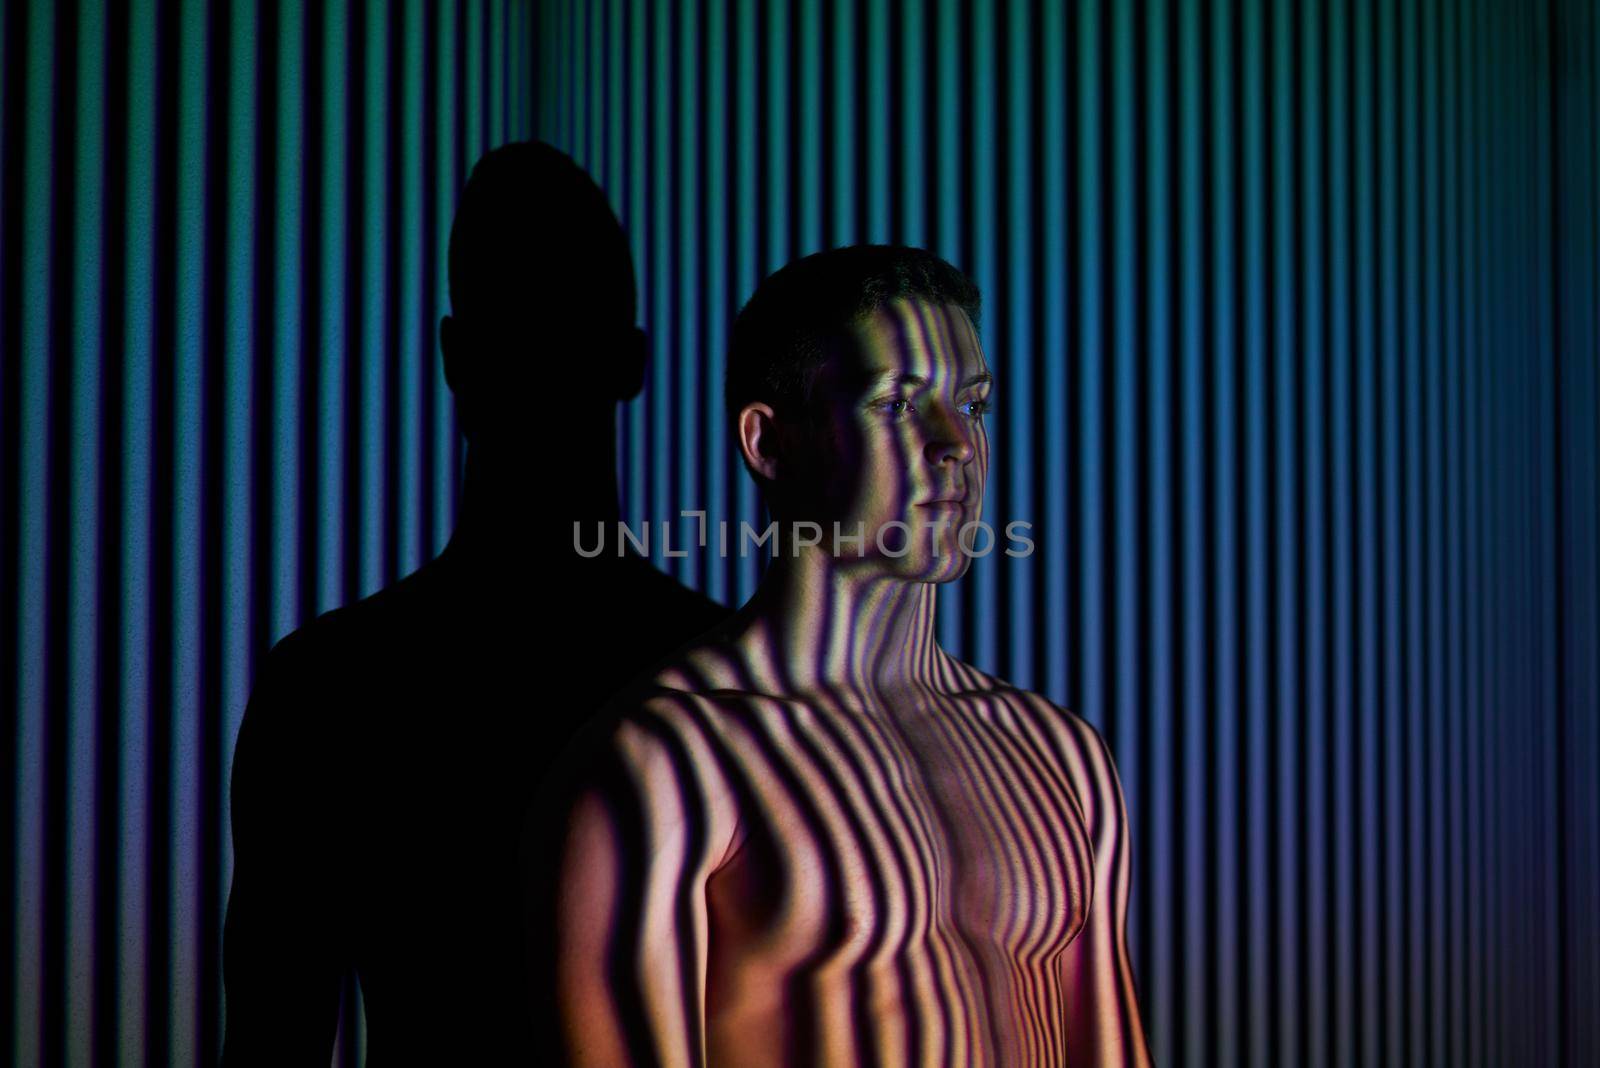 Into the mind of the man. Studio shot of a young man posing against abstract lighting. by YuriArcurs